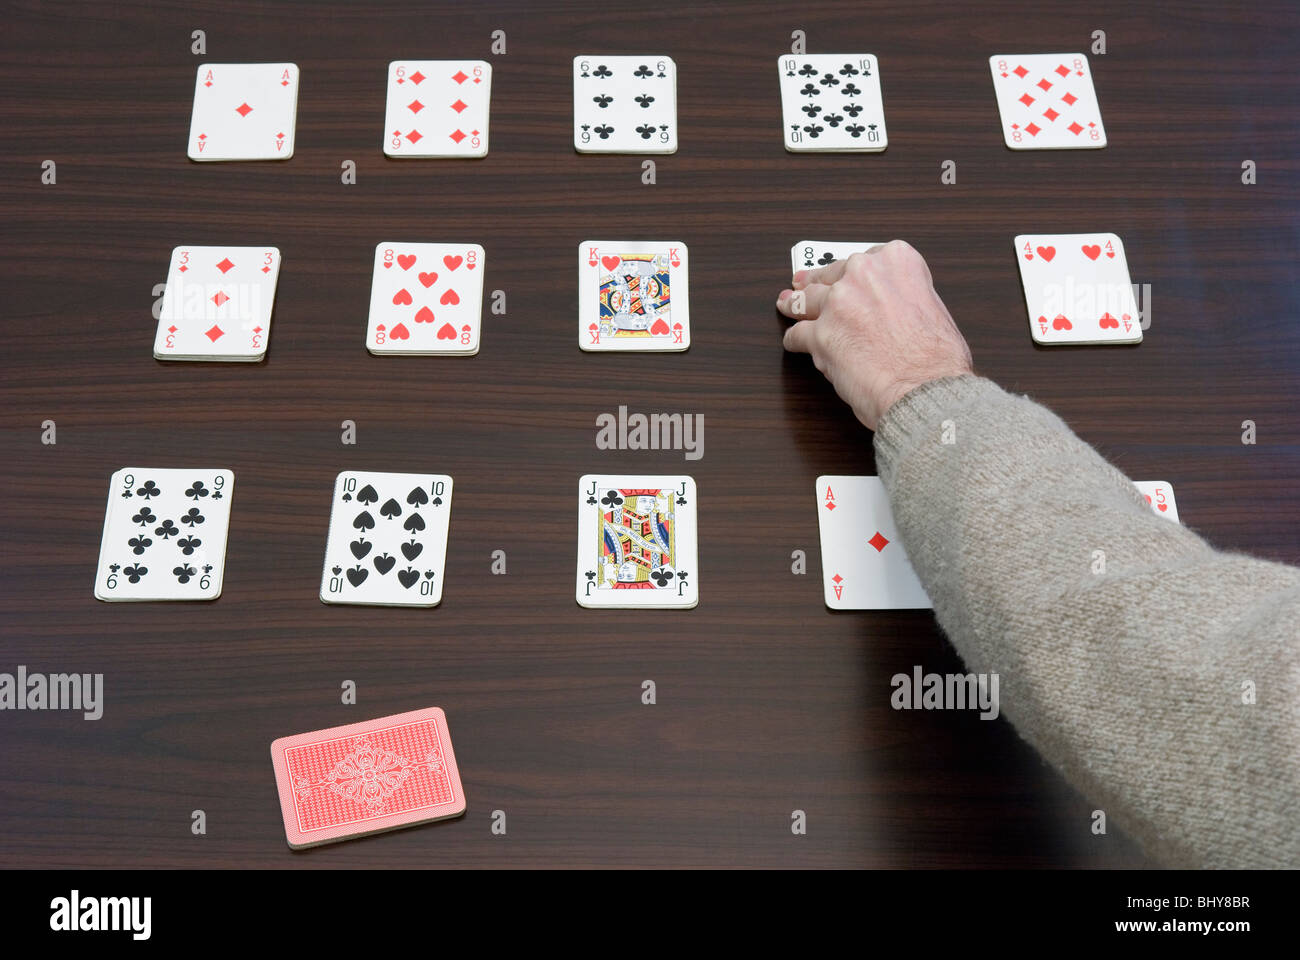 Solitaire Game Of Cards High Resolution Stock Photography And Images Alamy